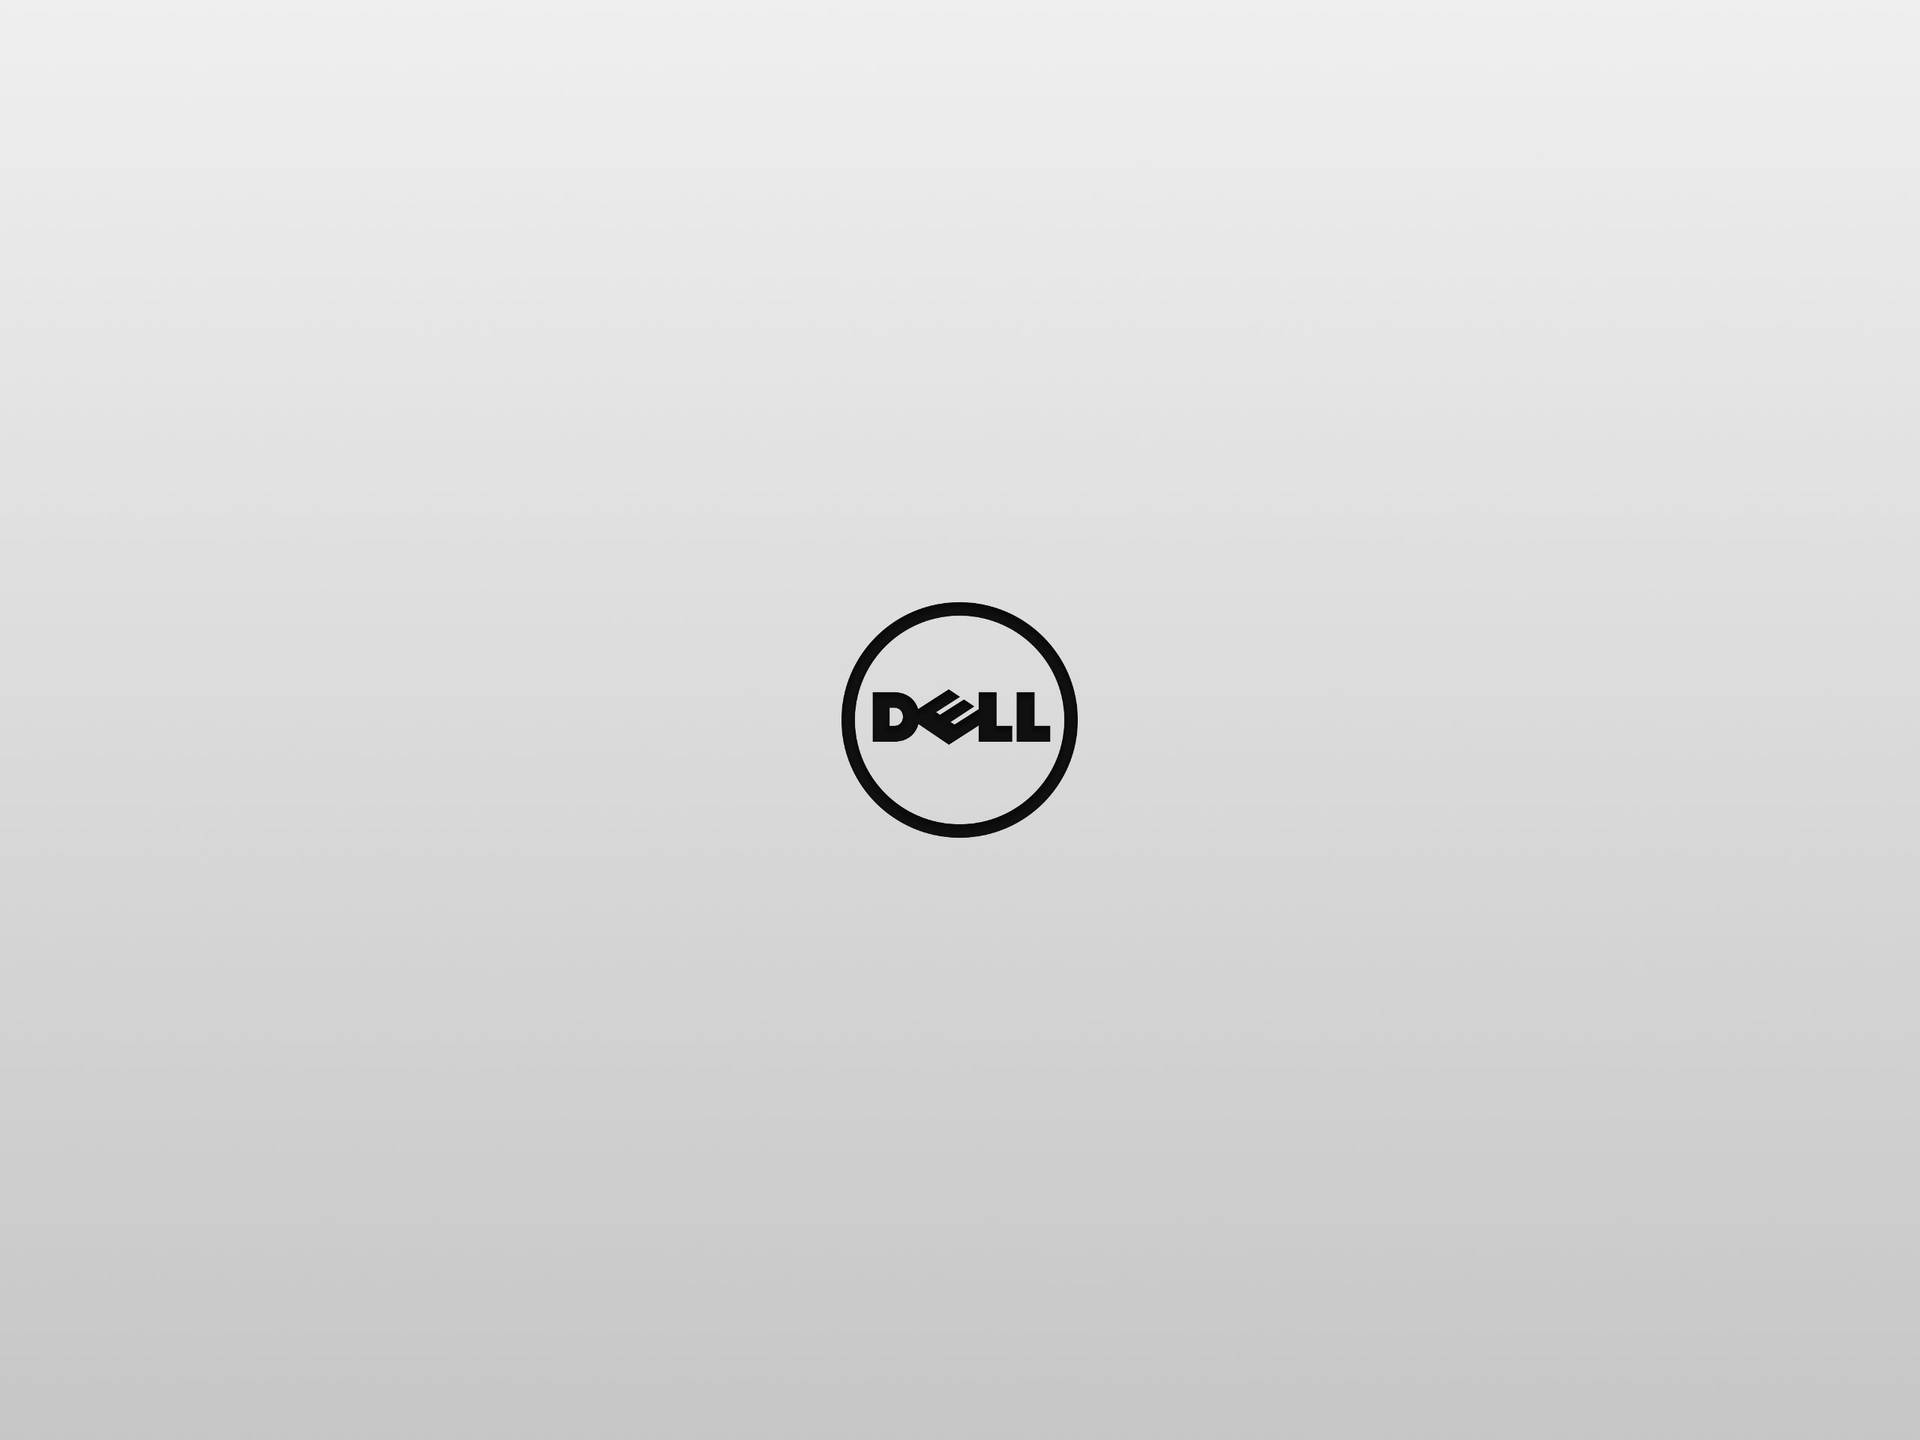 Dell 2560X1920 Wallpaper and Background Image